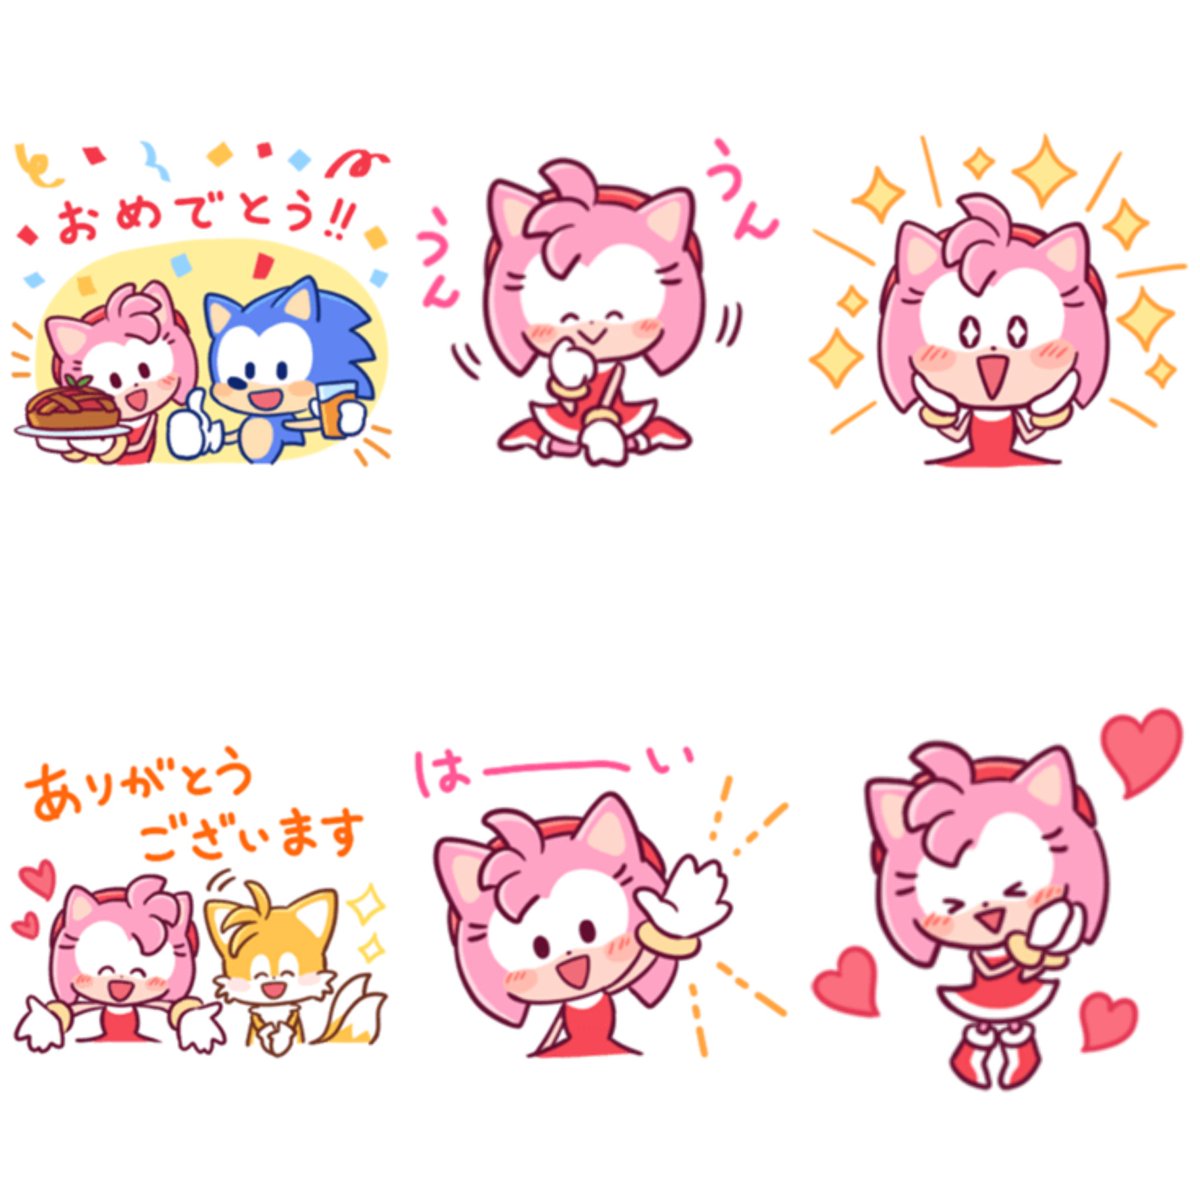 These line stickers are pretty cute ngl